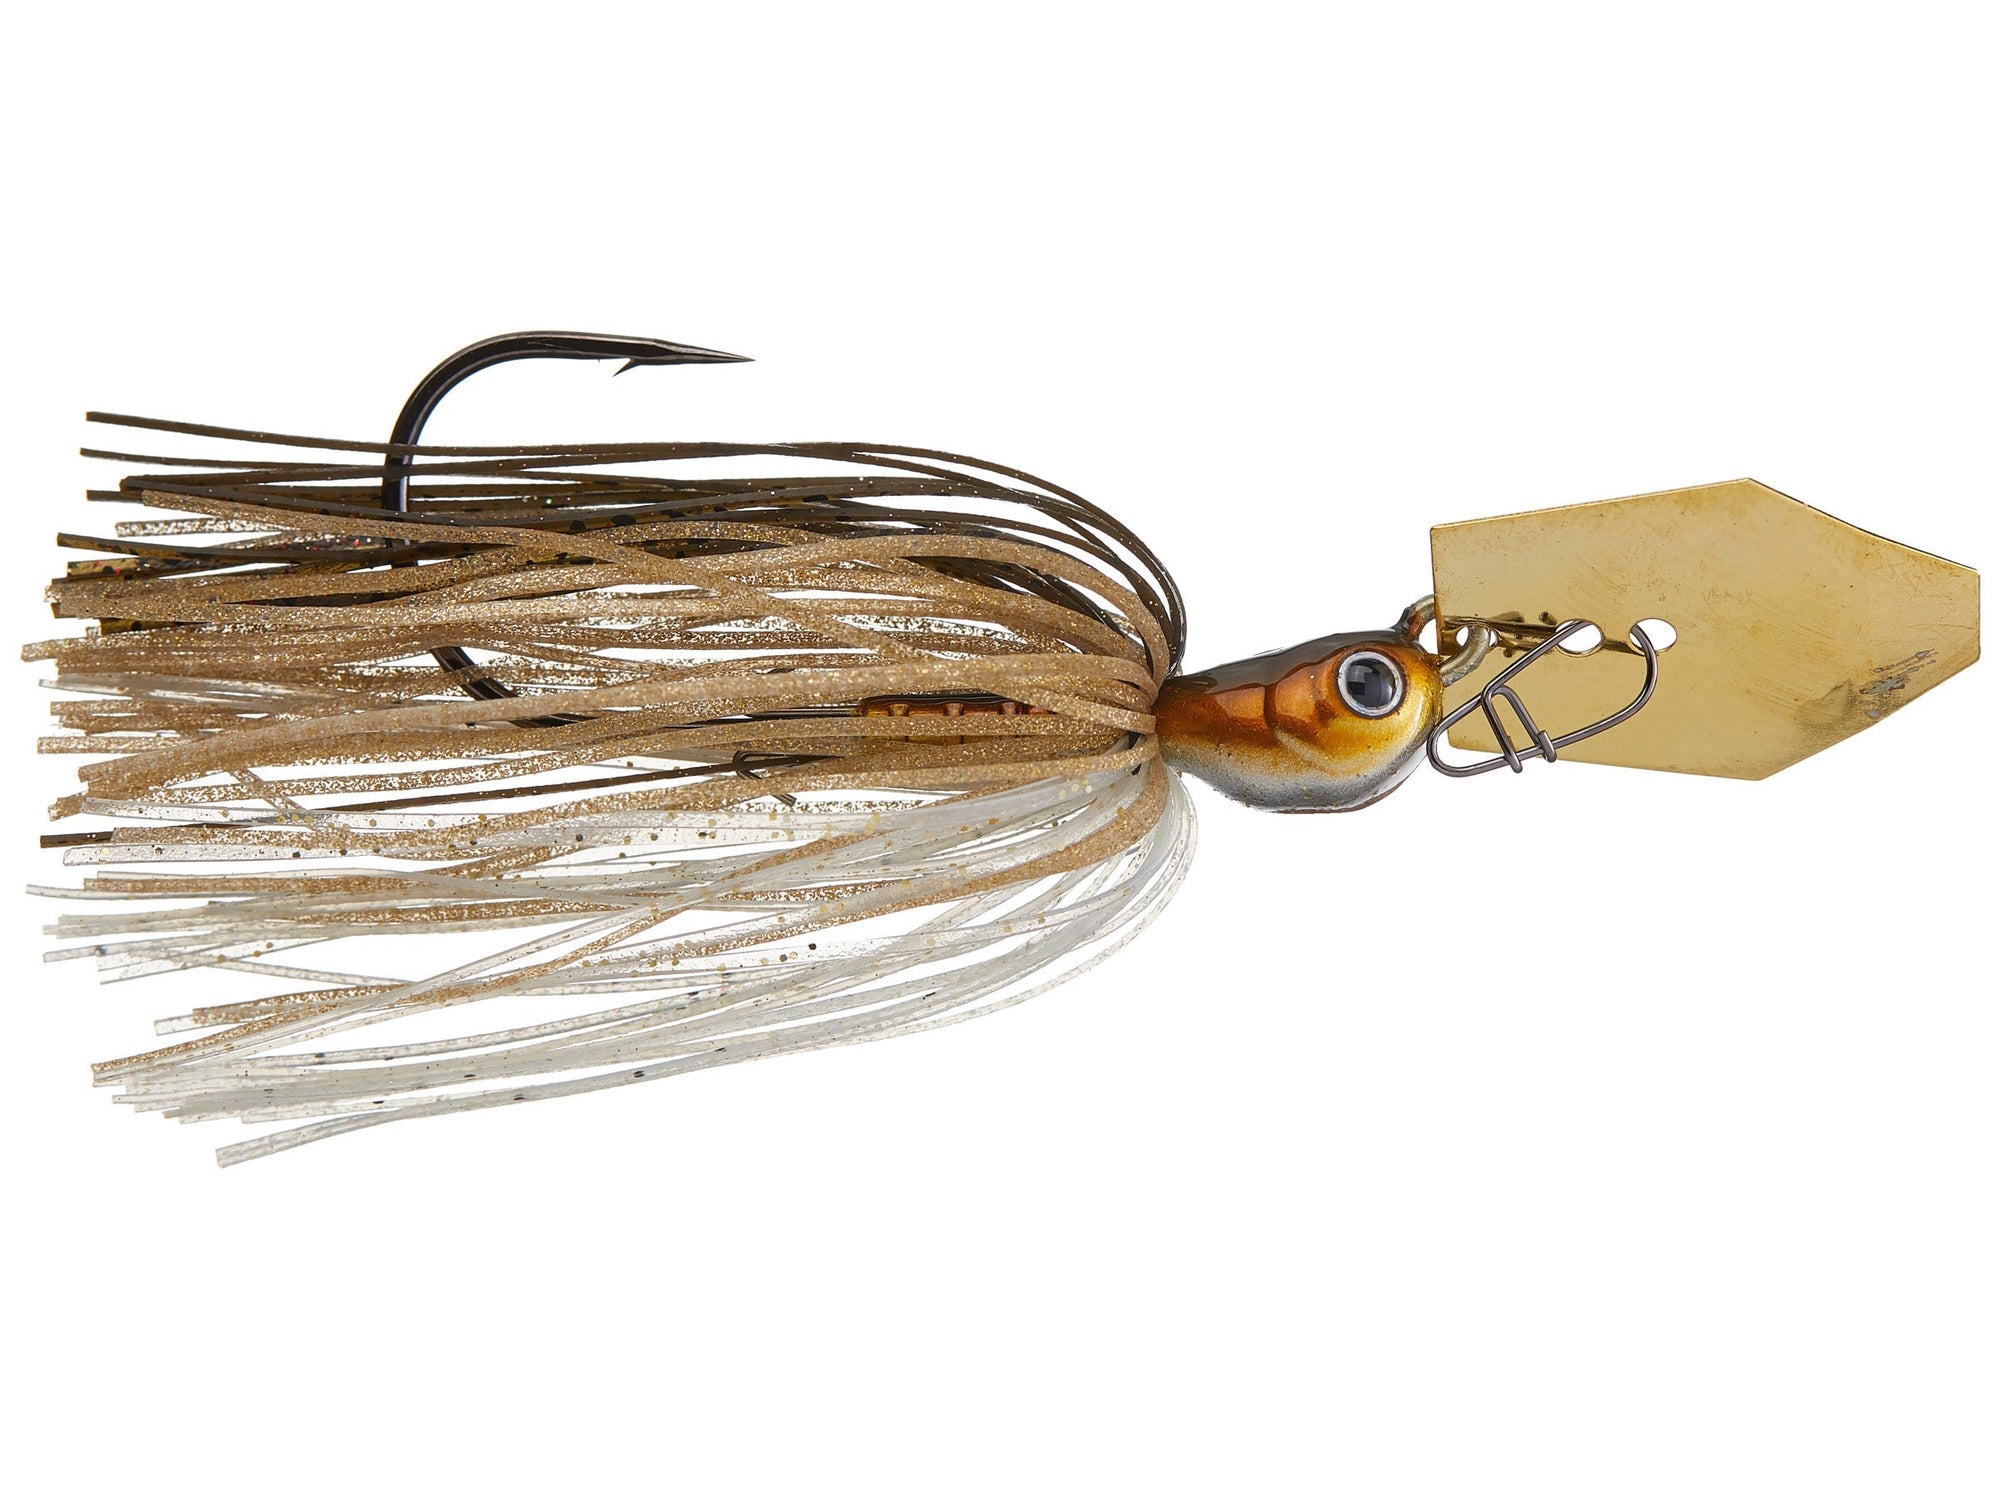 Z-Man Jack Hammer Chatterbait - 3/8 oz / Clearwater Shad